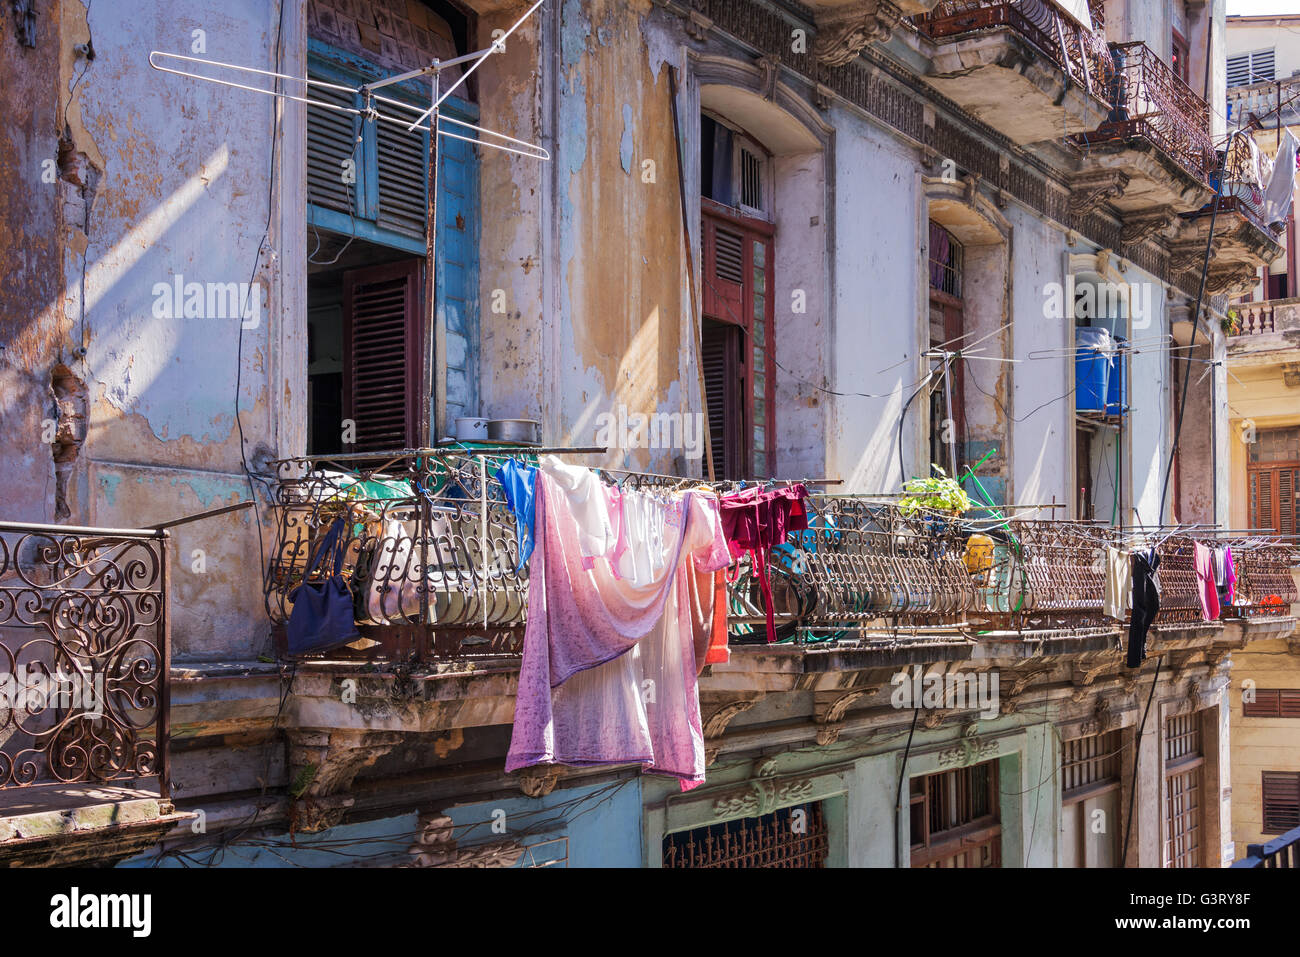 Laundry on the balcony of an old building in Havana, Cuba Stock Photo